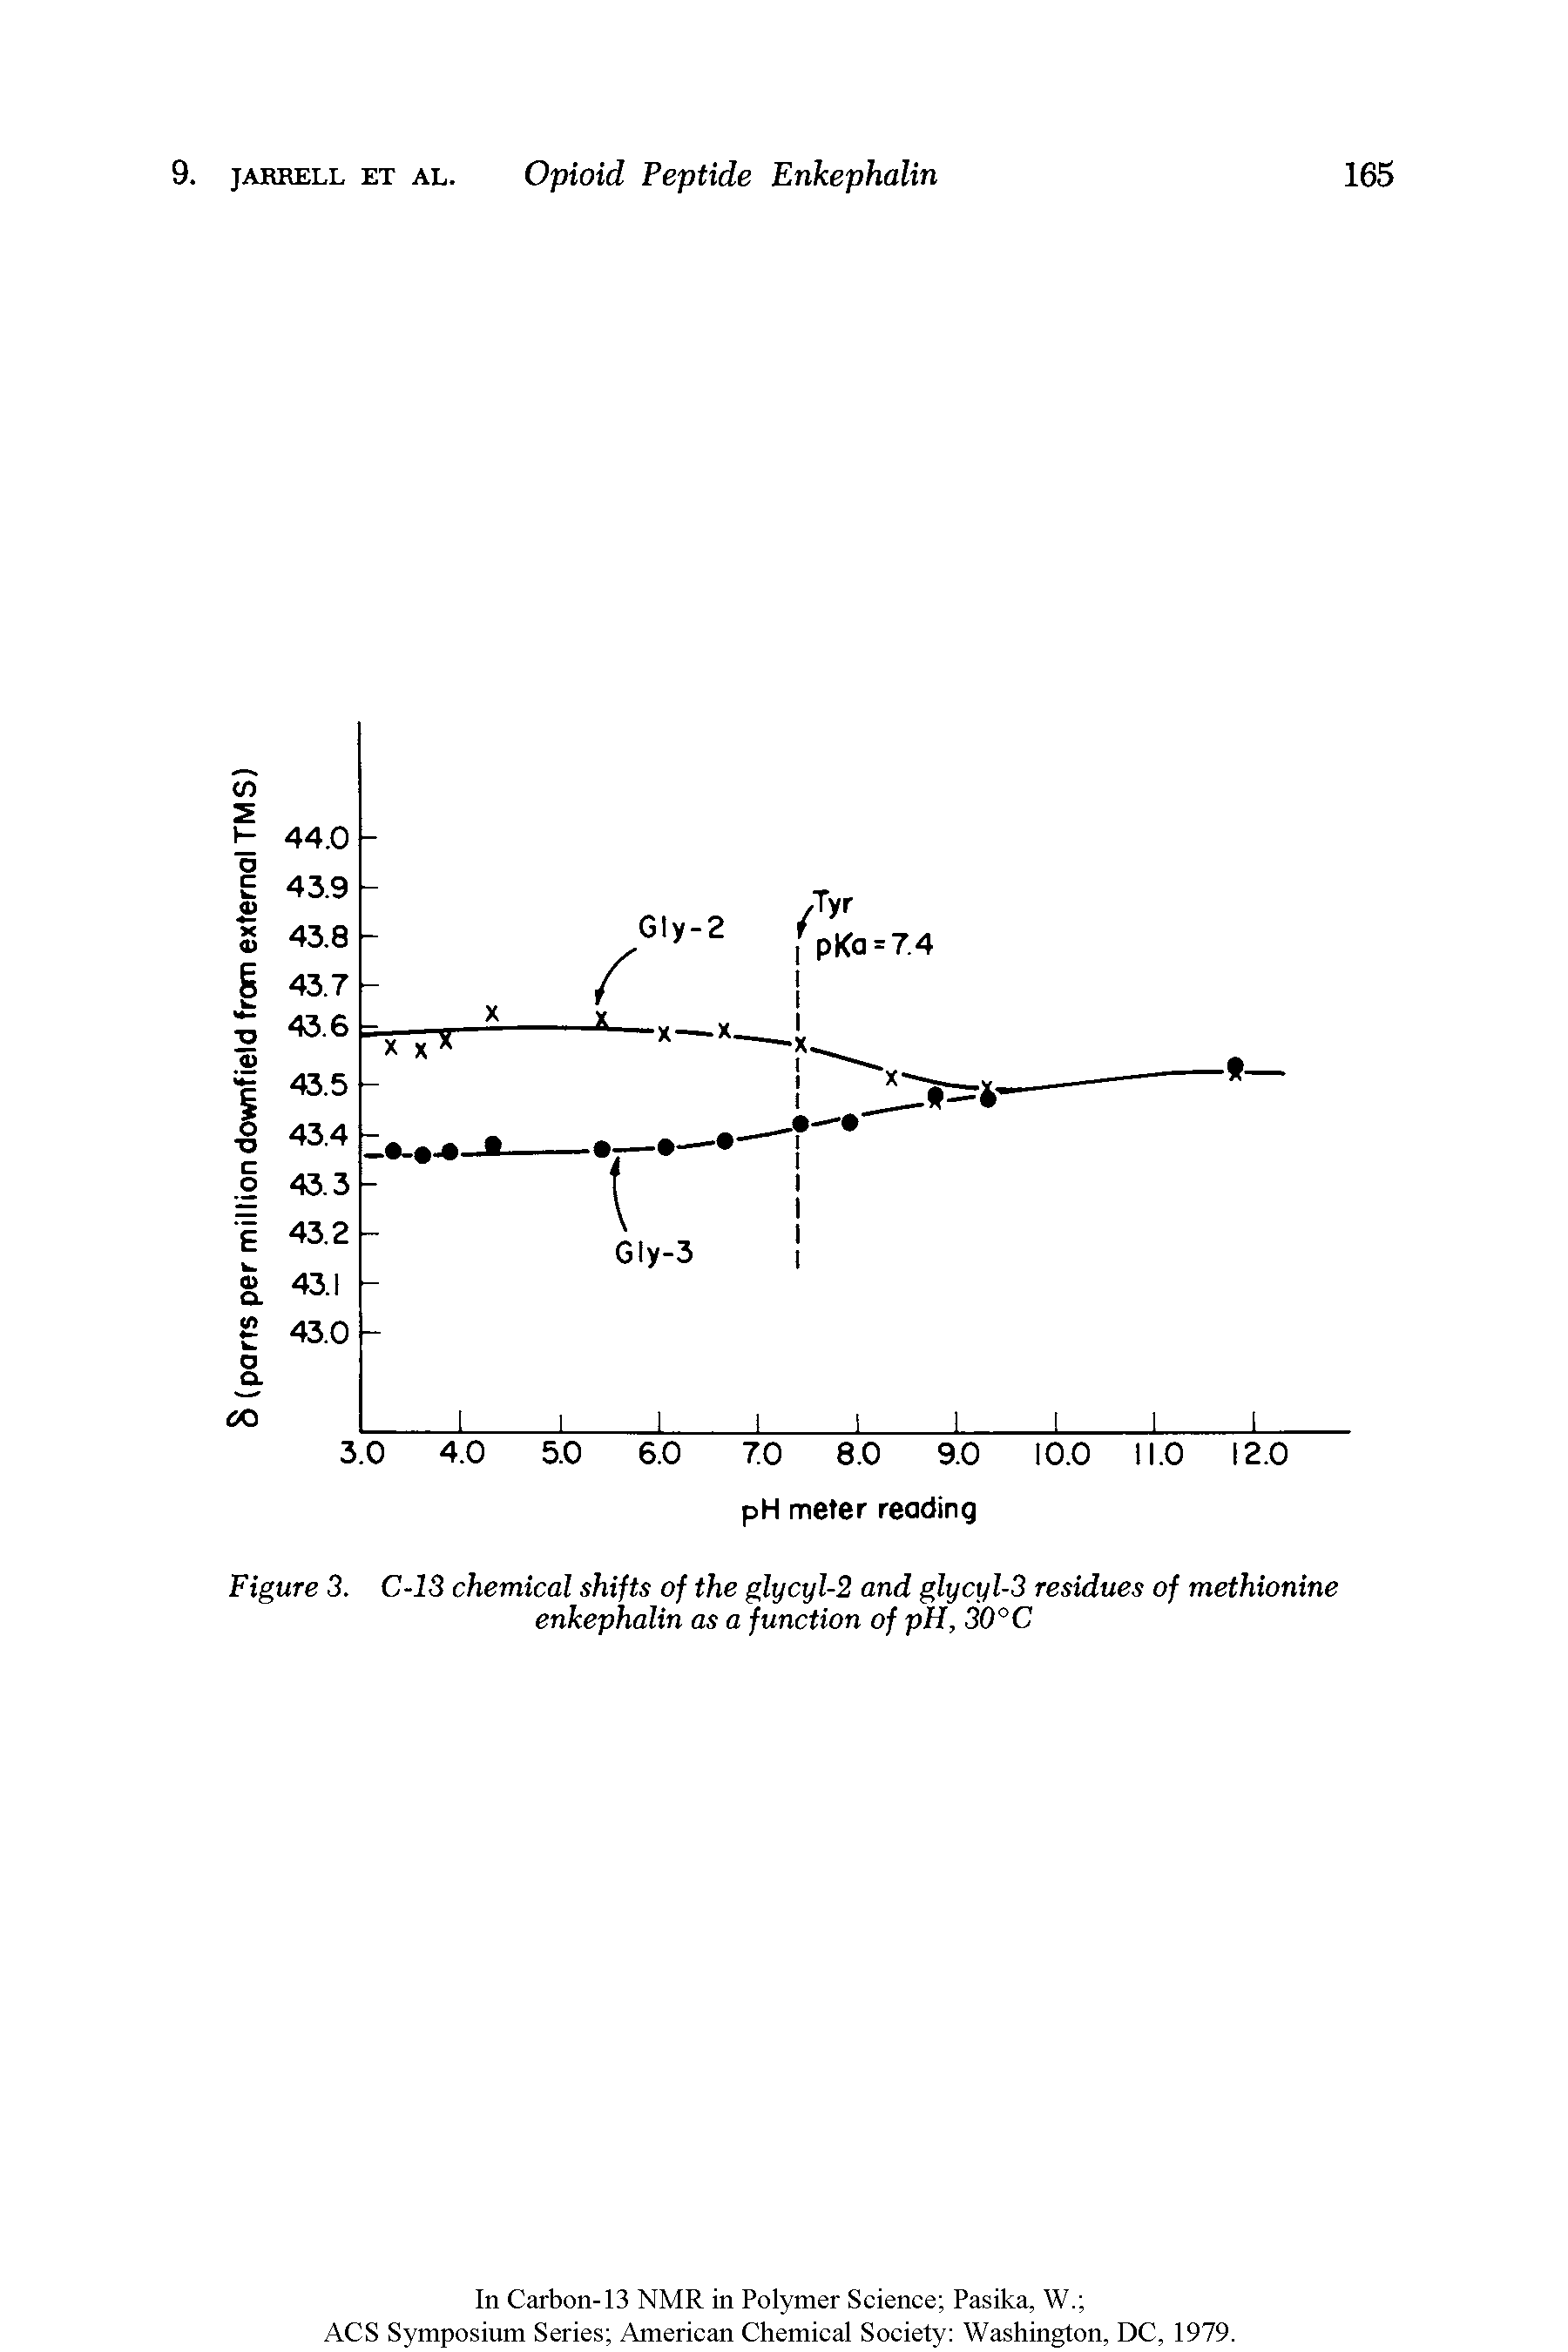 Figure 3. C-13 chemical shifts of the glycyl-2 and glycyl-3 residues of methionine enkephalin as a function of pH, 30°C...